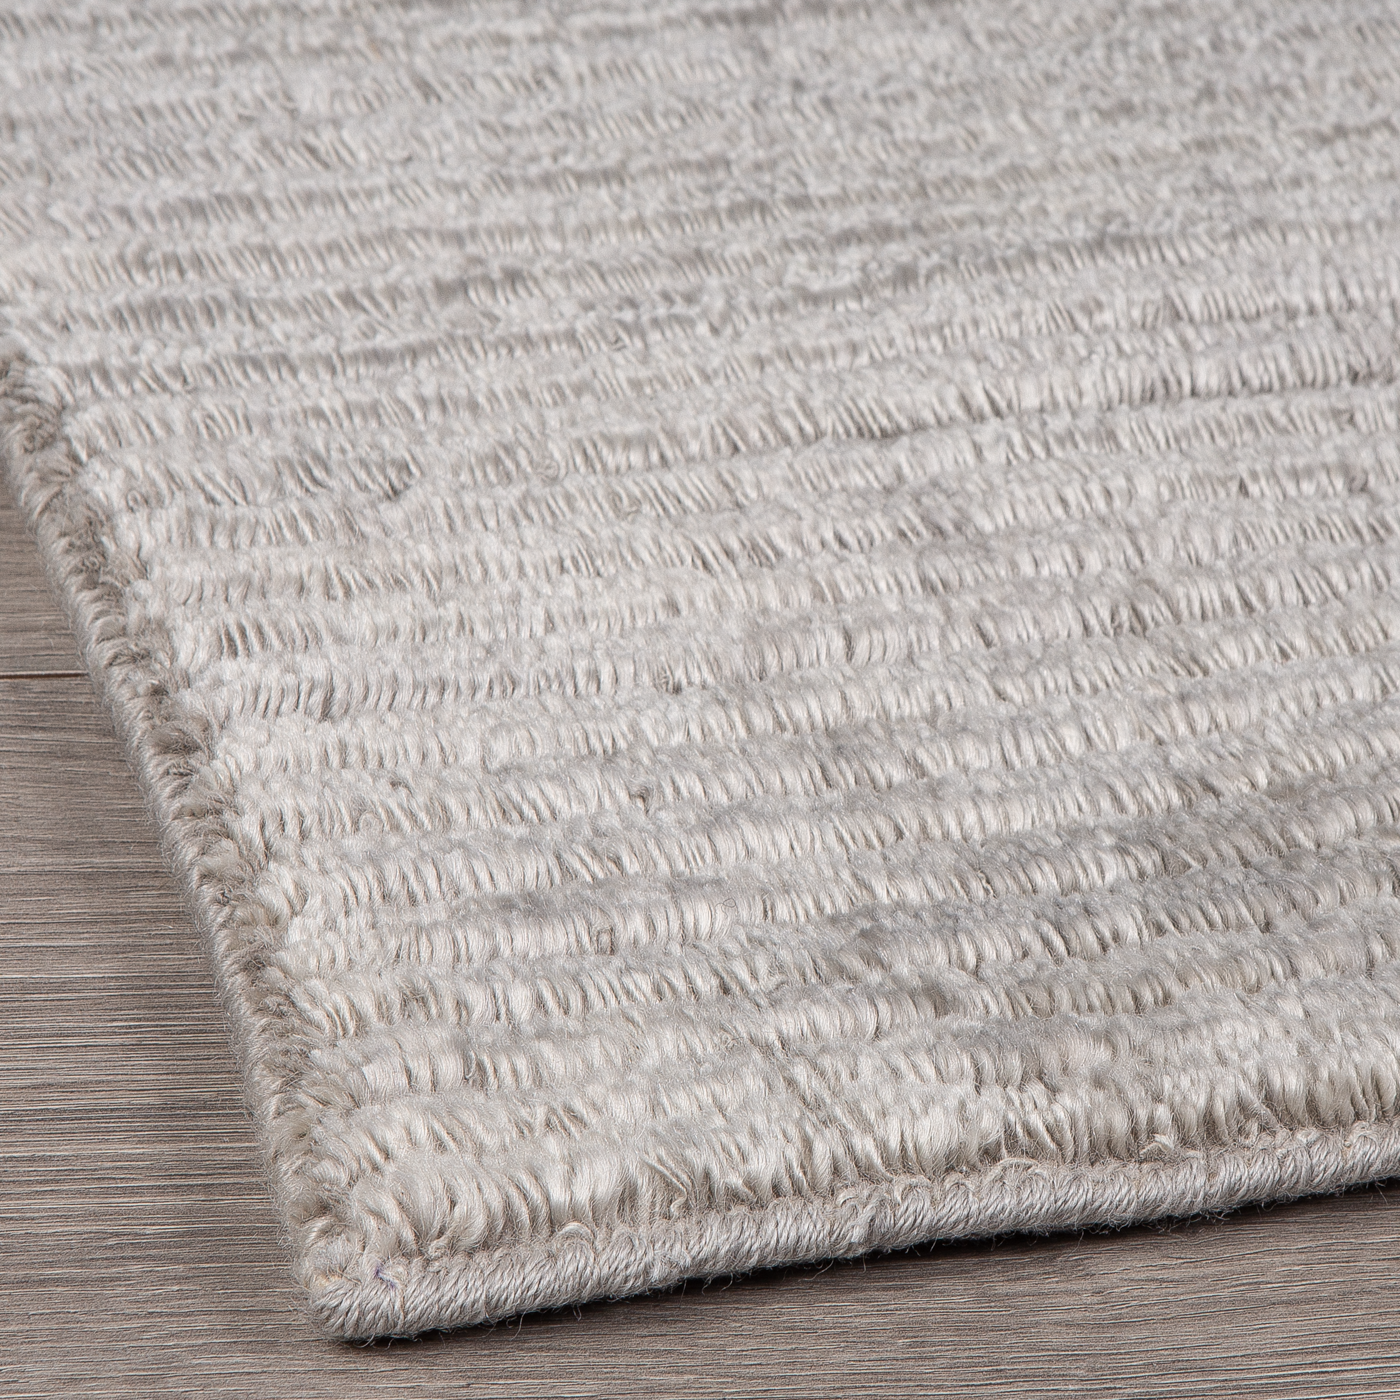 The Elte Heritage Rug Collection unites sumptuous natural materials with the highest regarded weaving and knotting techniques employed by master artisans that have built on generat